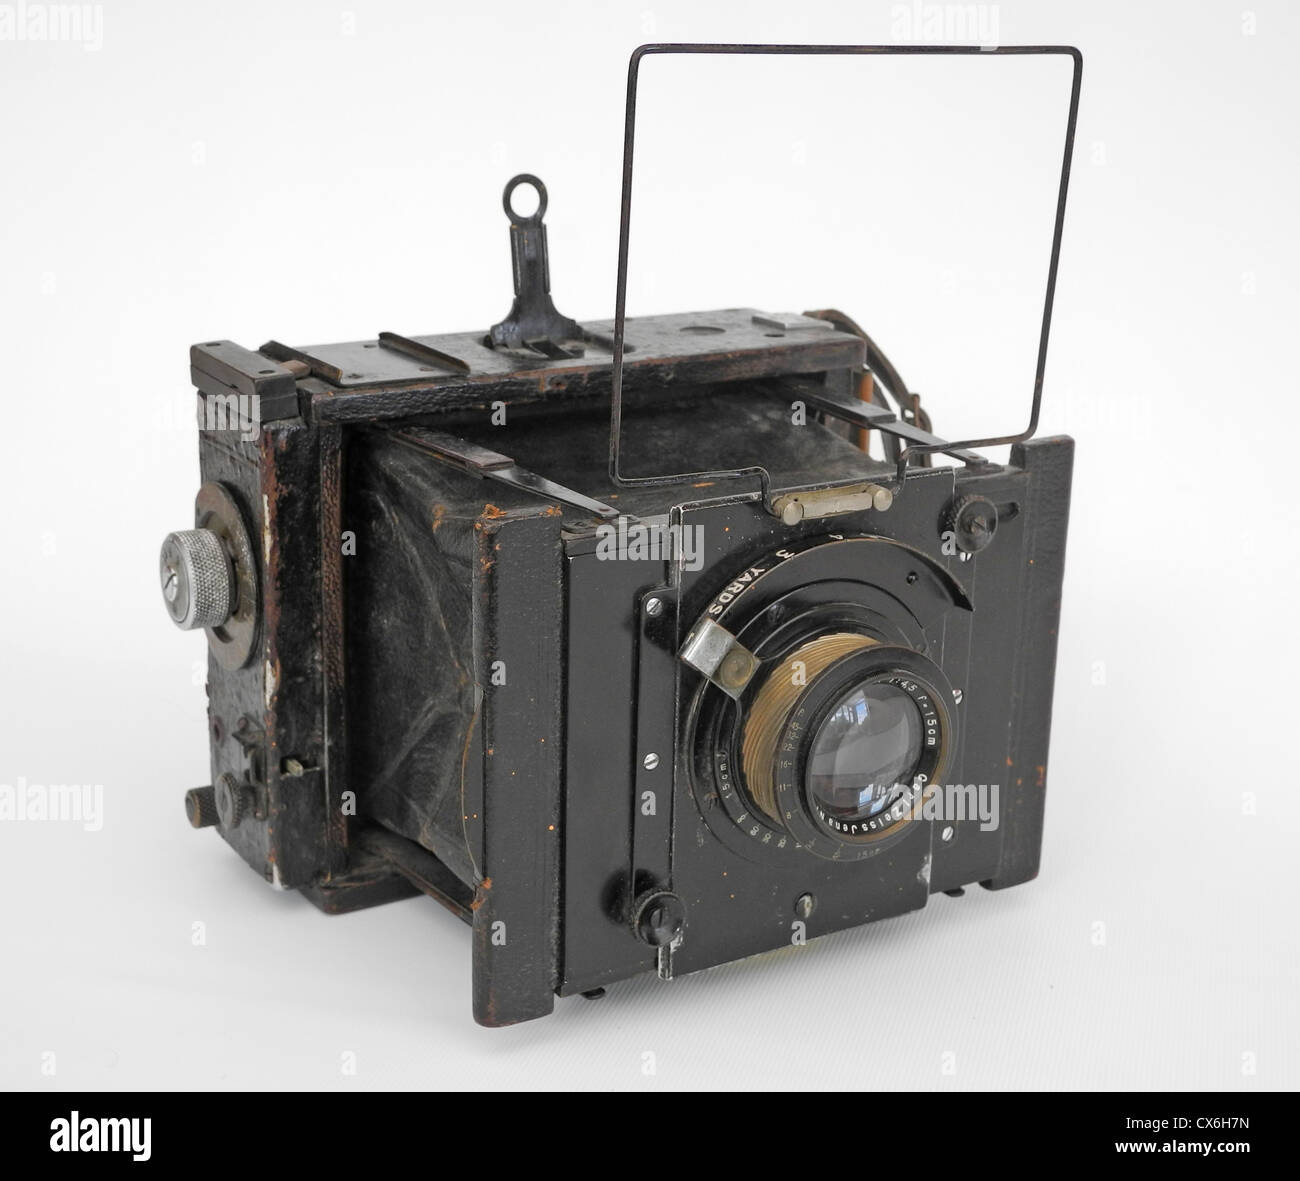 This is a vintage Fleet Street press camera - a Peeling and Van Neck (VN) 9cmx 12cm plate camera used by photographers between the 1930's and the 1950's PROPERTY RELEASE NOT REQUIRED COMPANY NO LONGER EXISTS Stock Photo